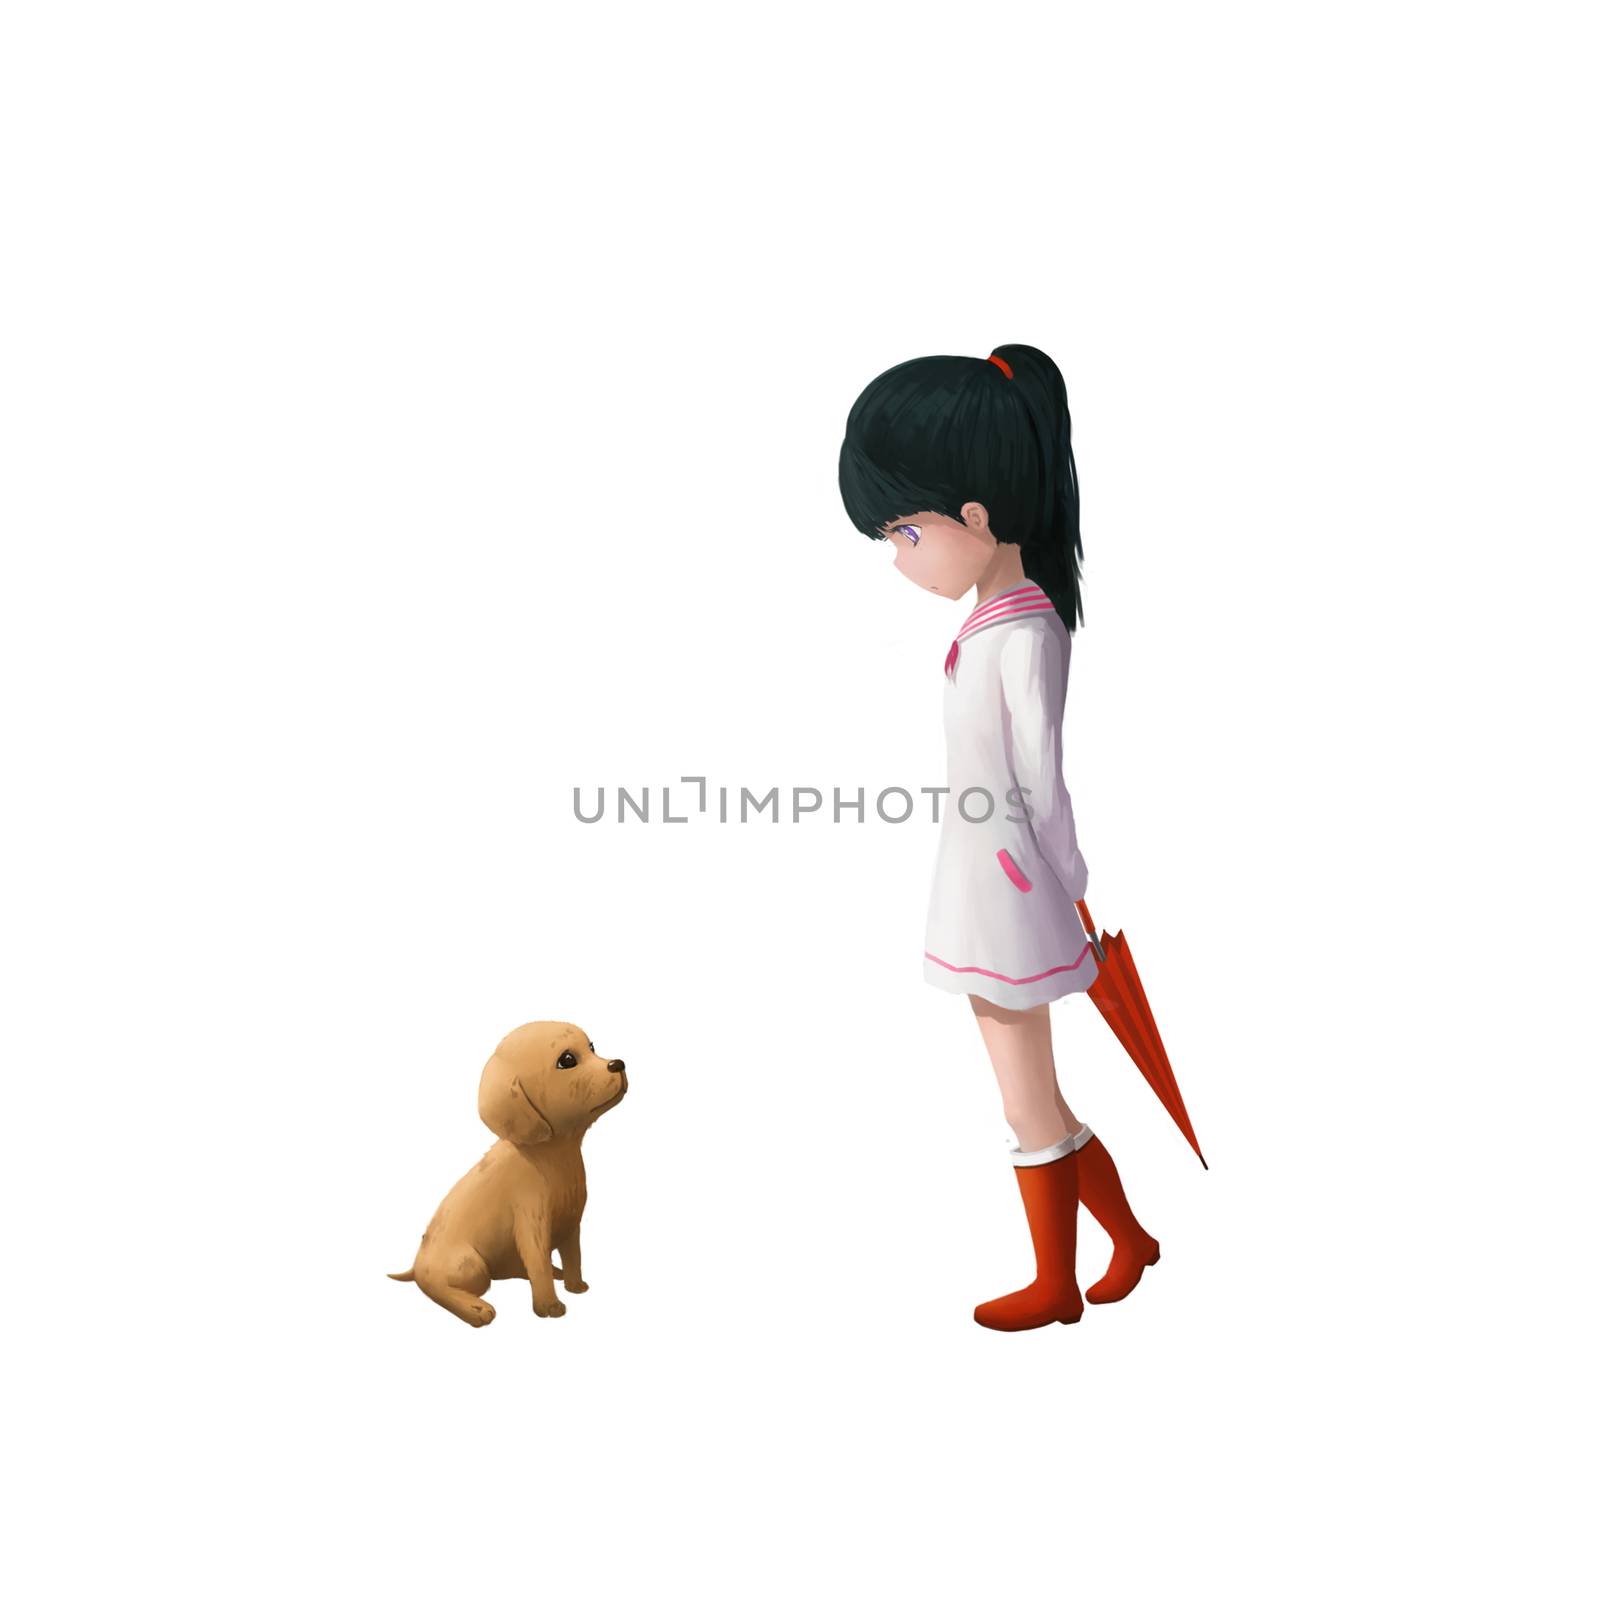 Illustration: Spring: The Girl with Umbrella and Her Dog. Fantastic Cartoon Style Character Design with Story.